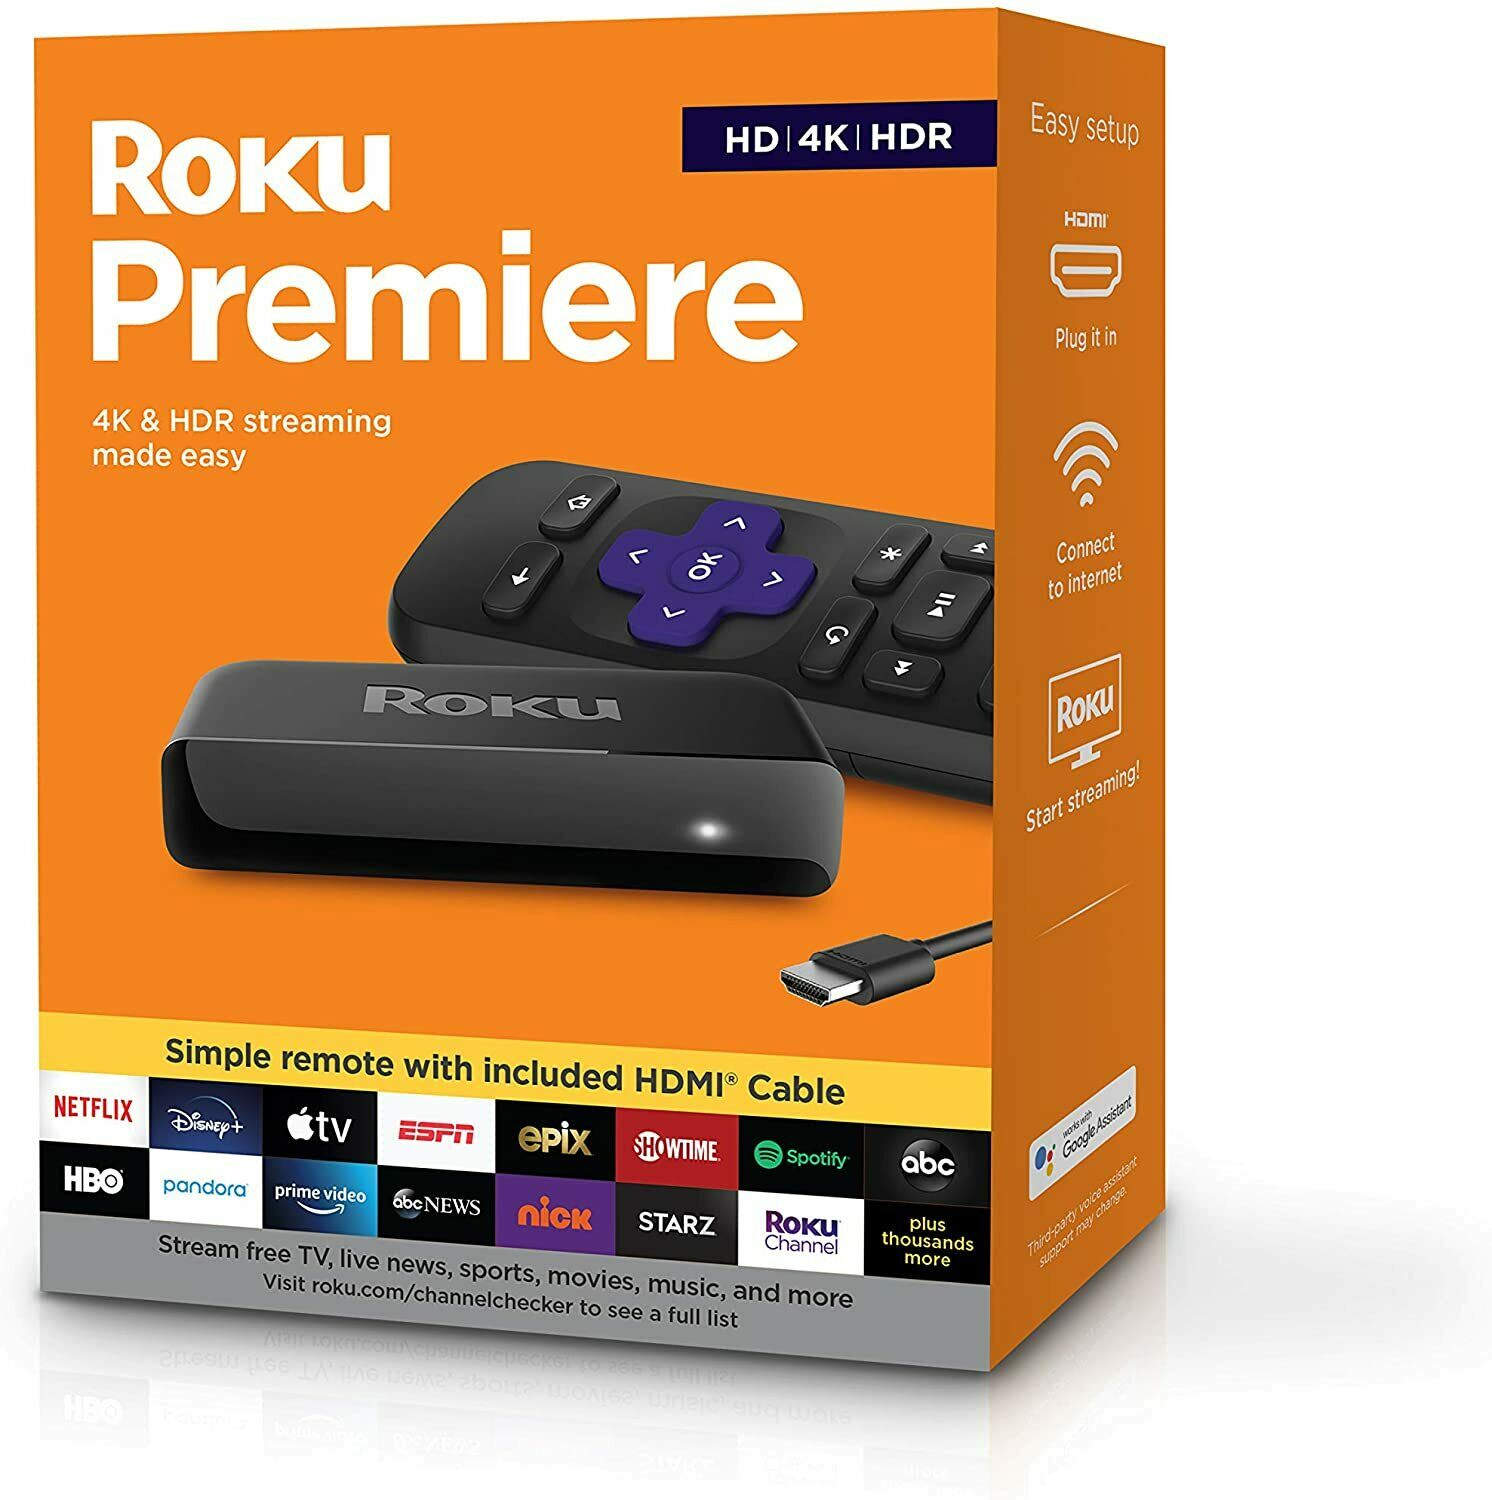 Newest Roku Premiere 3920r Hd/4k/hdr Streaming Media Player,latest Version!